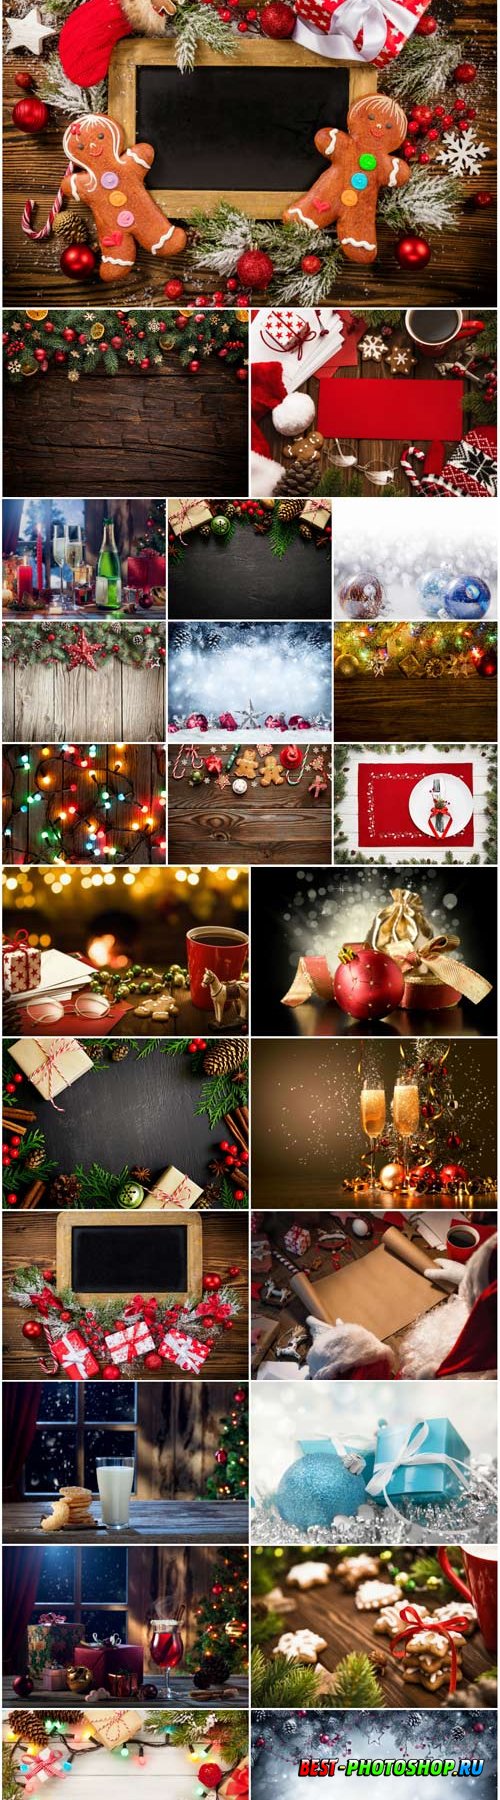 New Year and Christmas stock photos 55